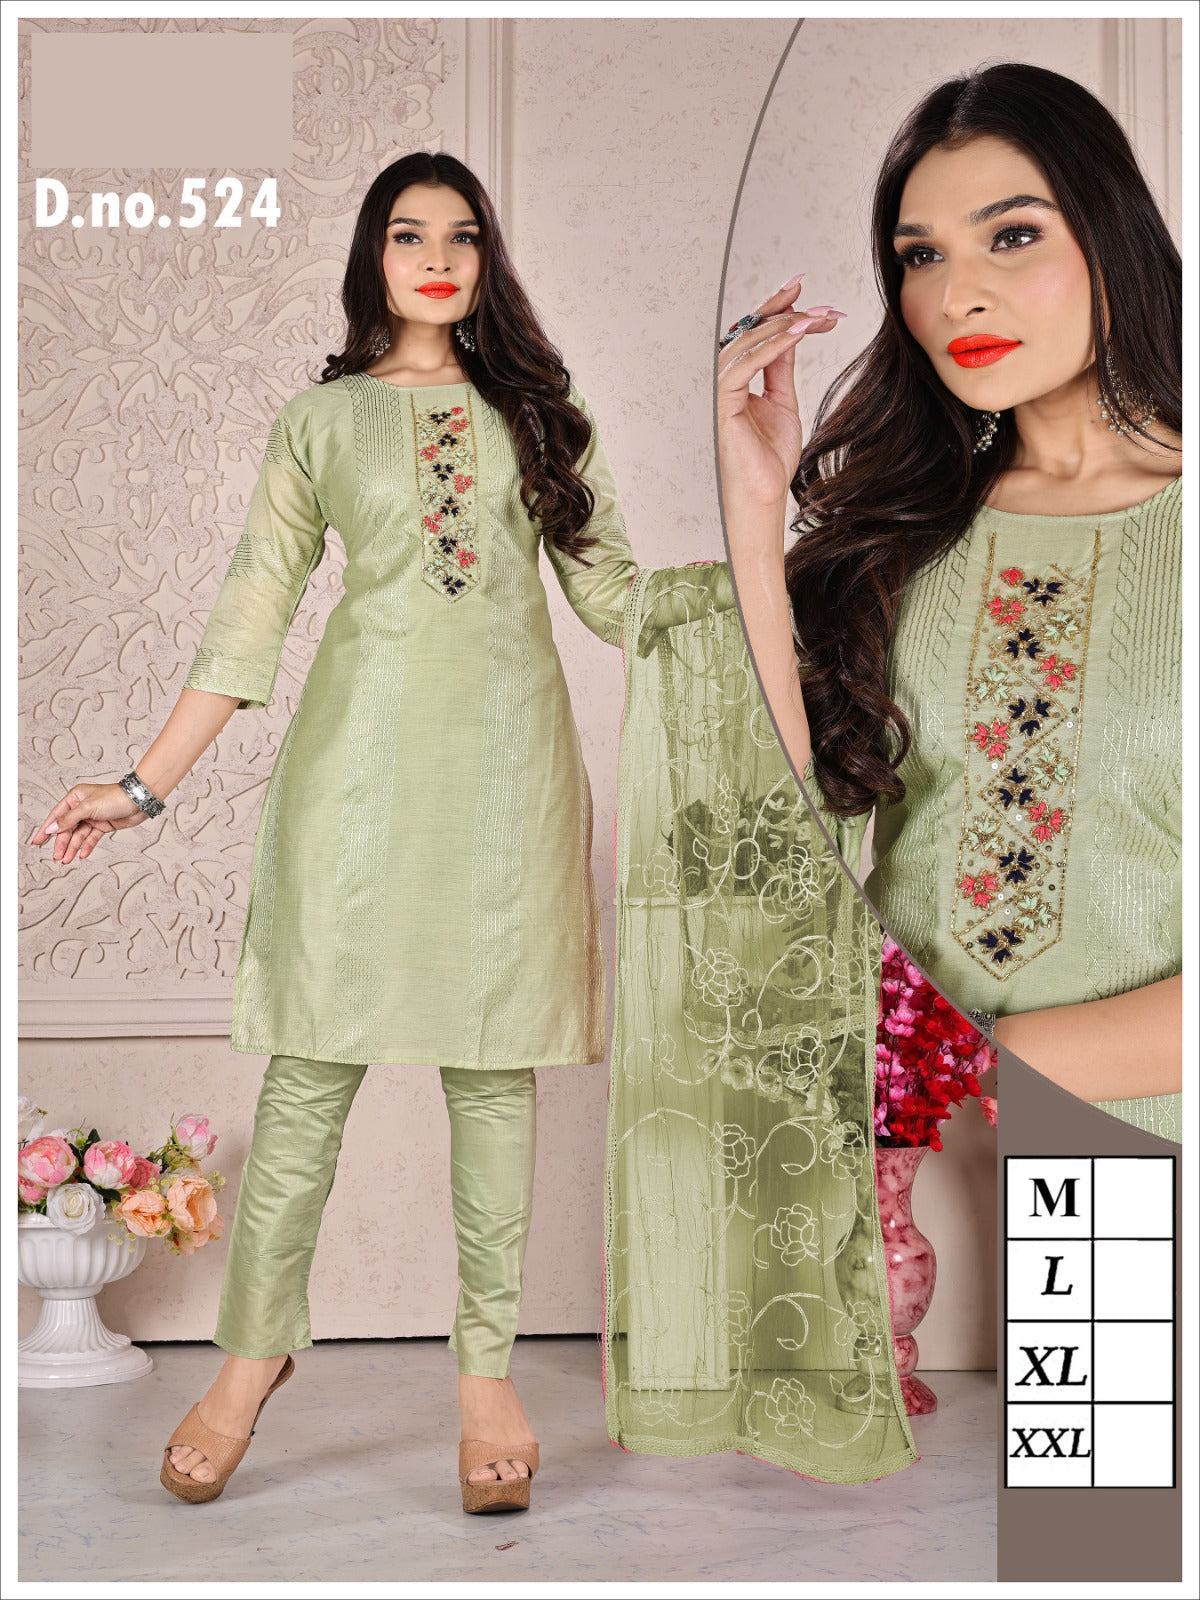 512-524-529 Kh Chanderi Readymade Pant Style Suits